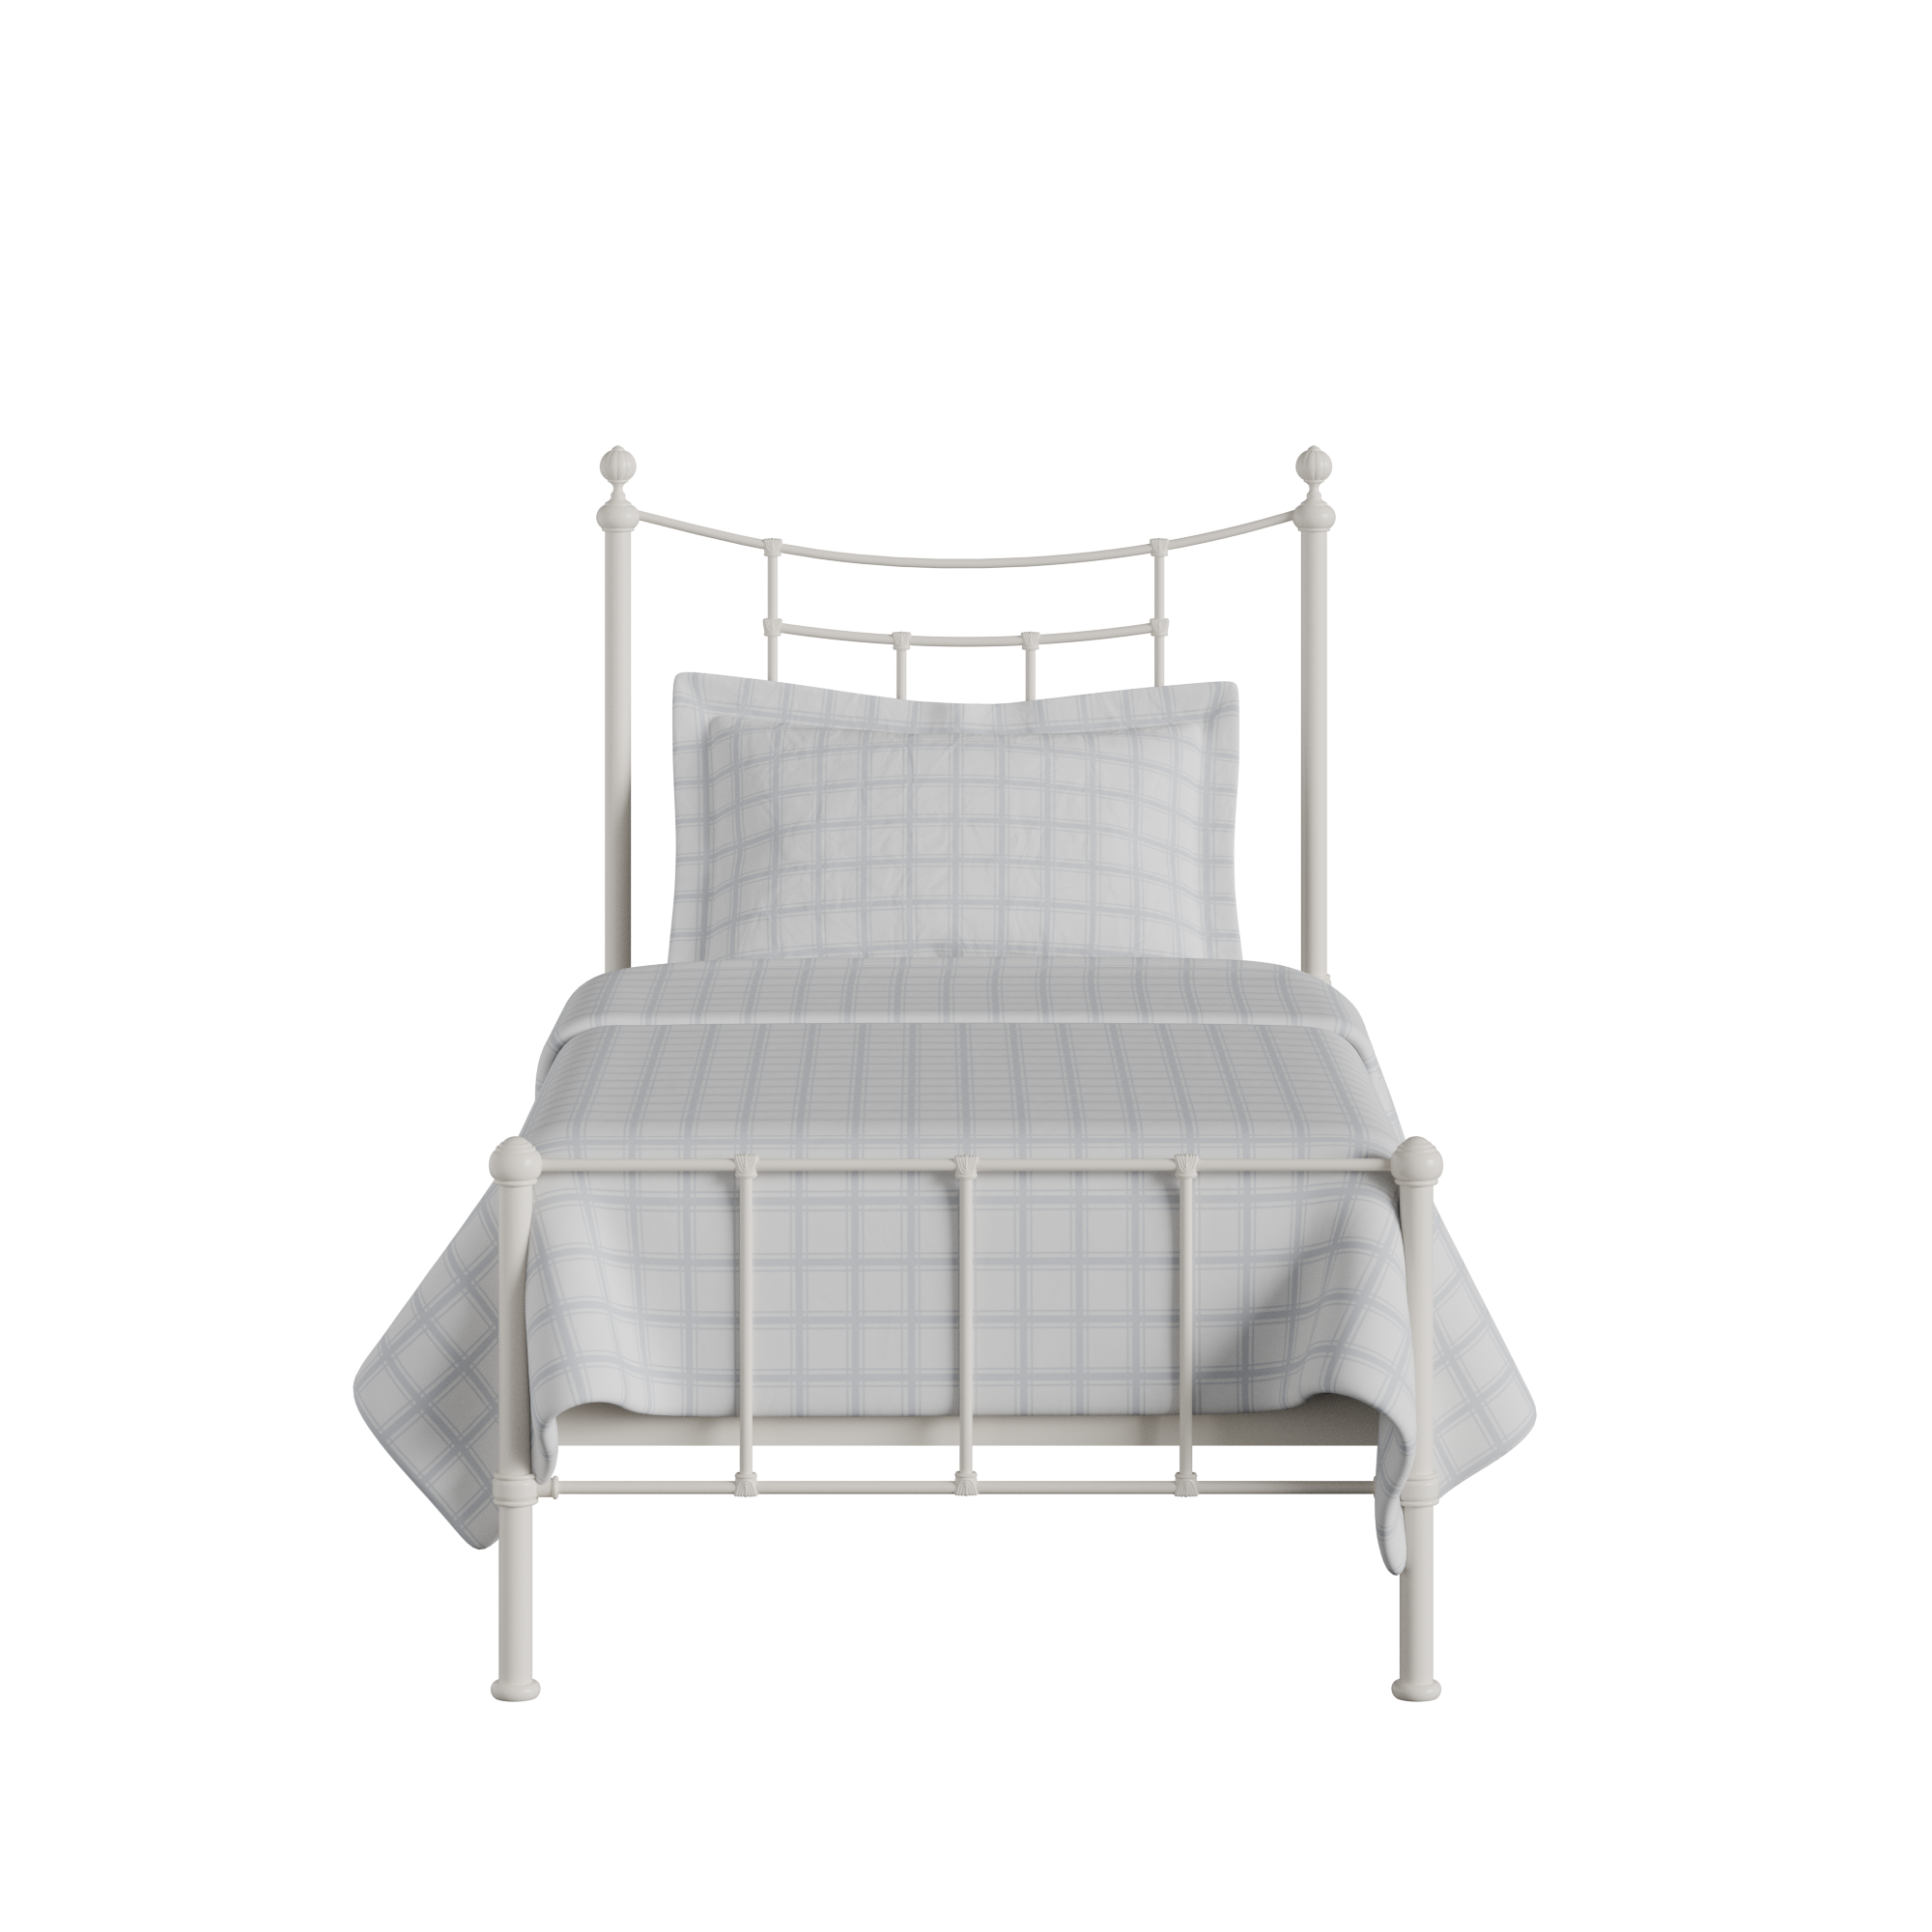 Isabelle iron/metal single bed in ivory